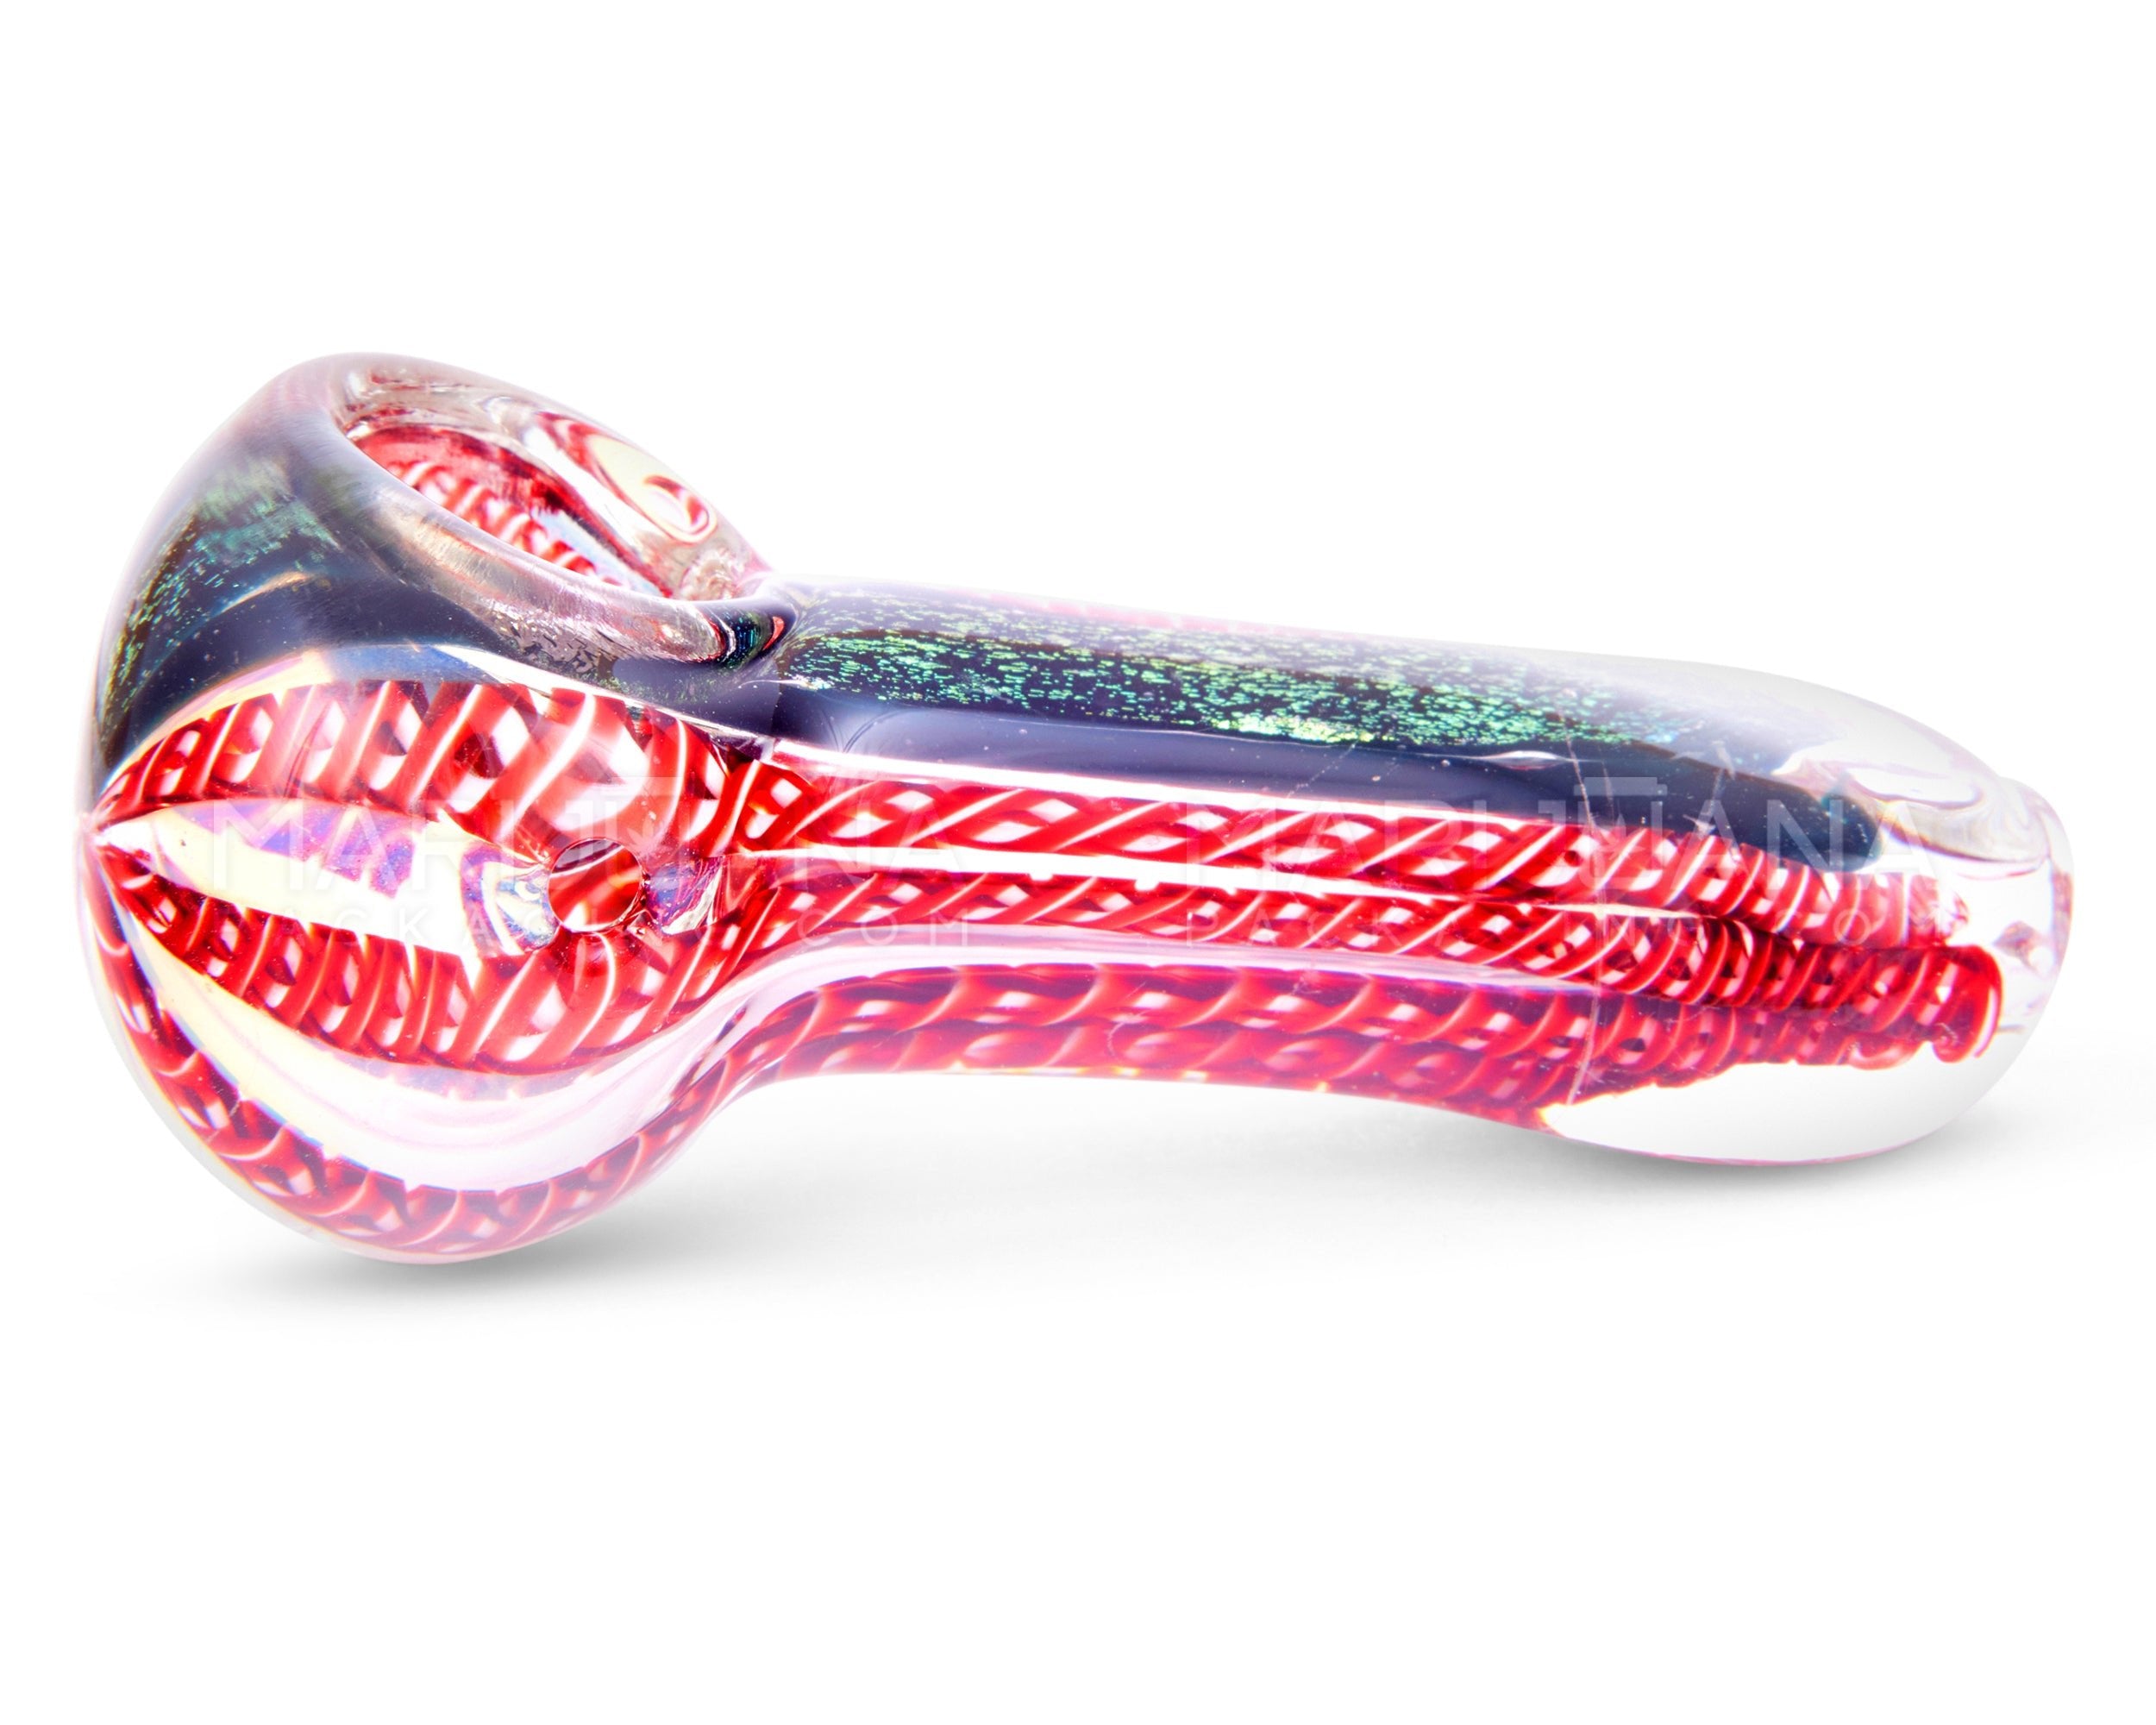 Dichro & Swirl Spoon Hand Pipe w/ Ribboning | 3.5in Long - Glass - Assorted - 5